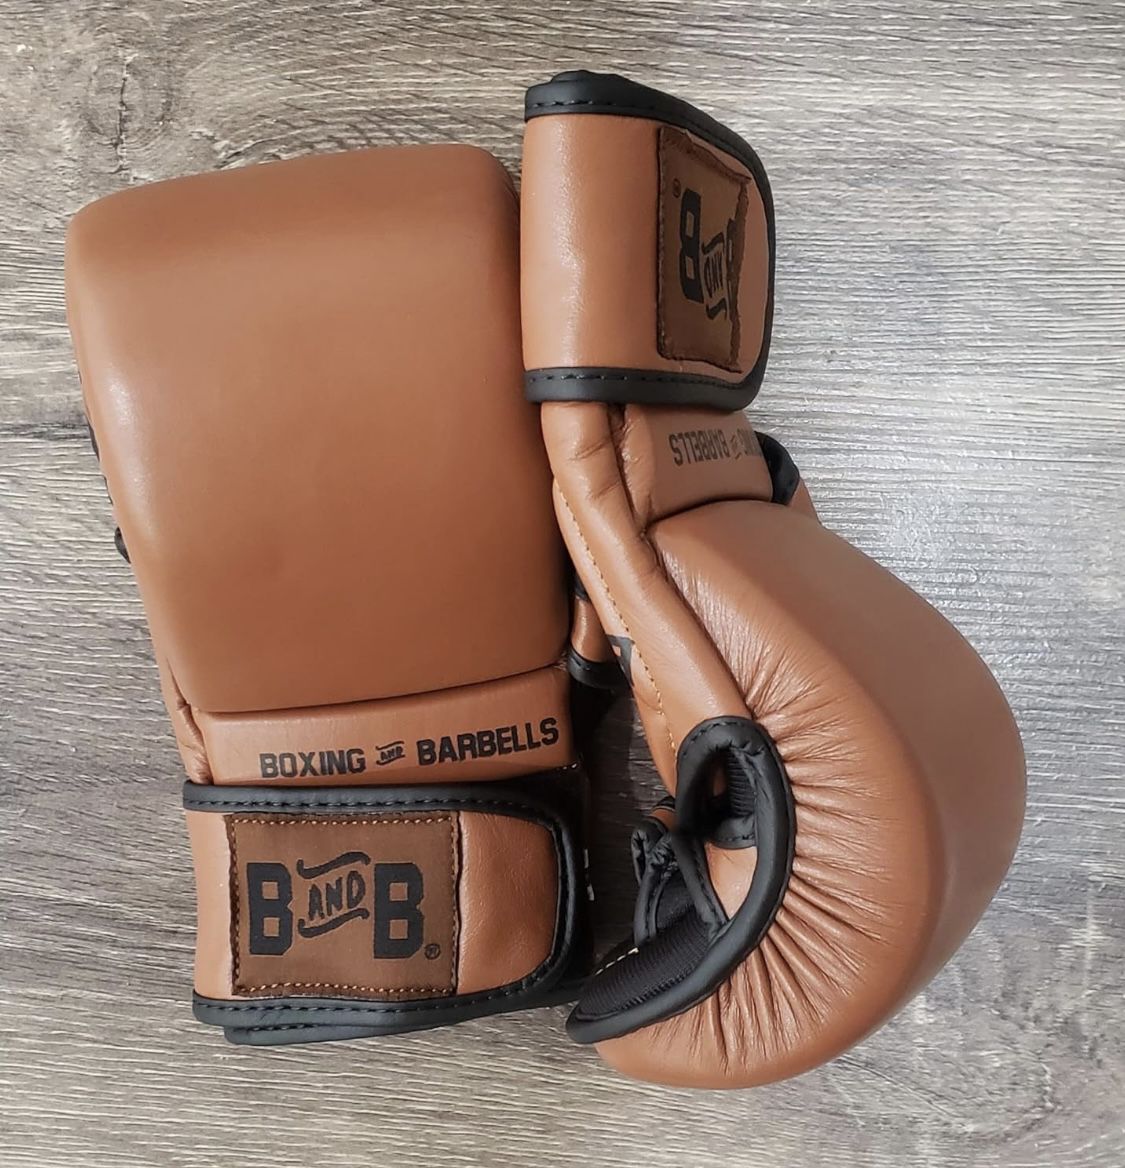 Boxing and Barbells Hybrid Boxing Gloves